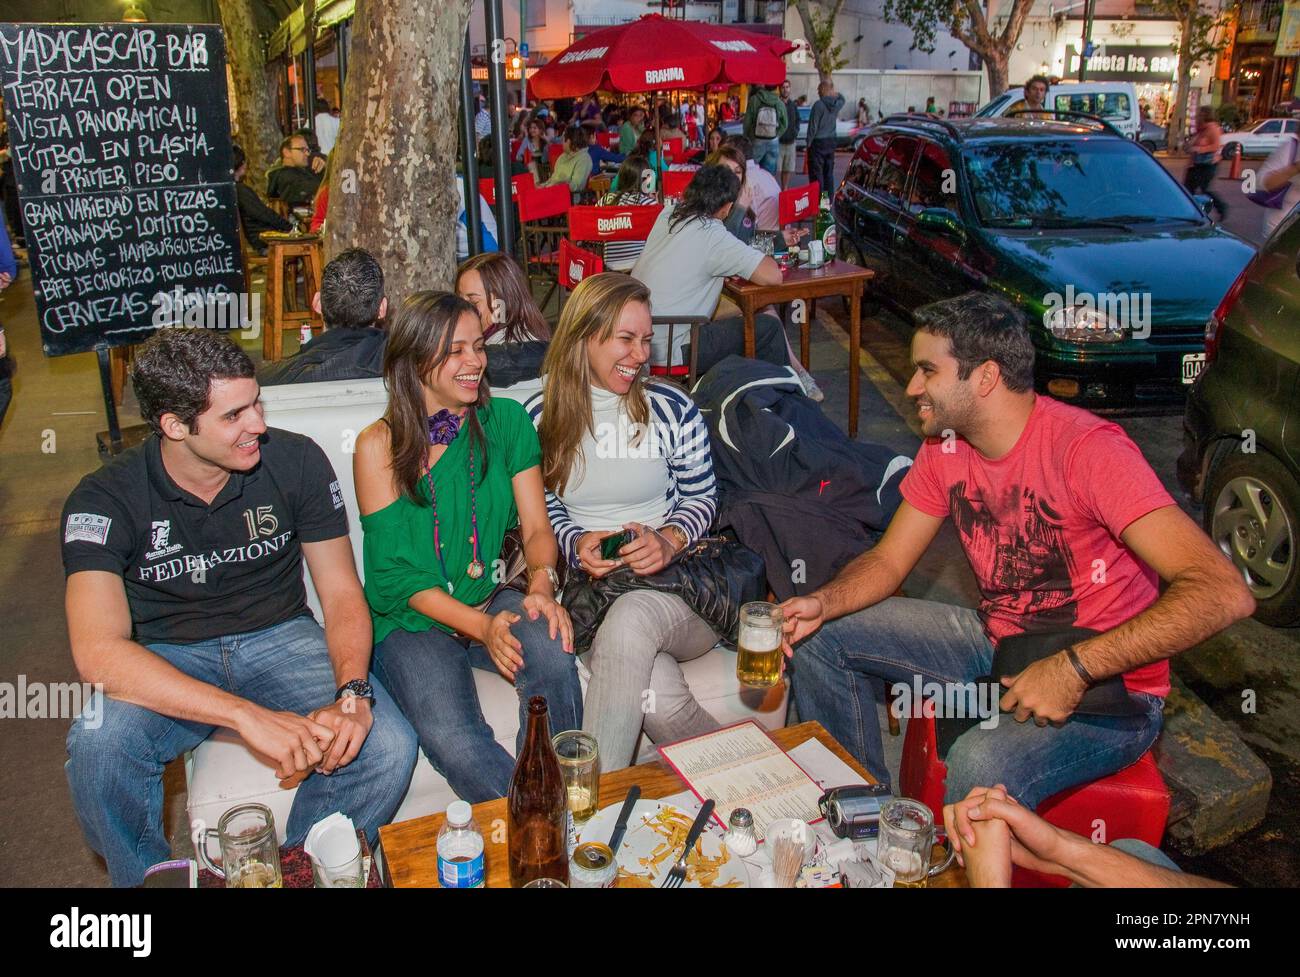 Argentina, Buenos Aires. There are many bars around the Plaza Costa Rica in Palermo Soho. Stock Photo